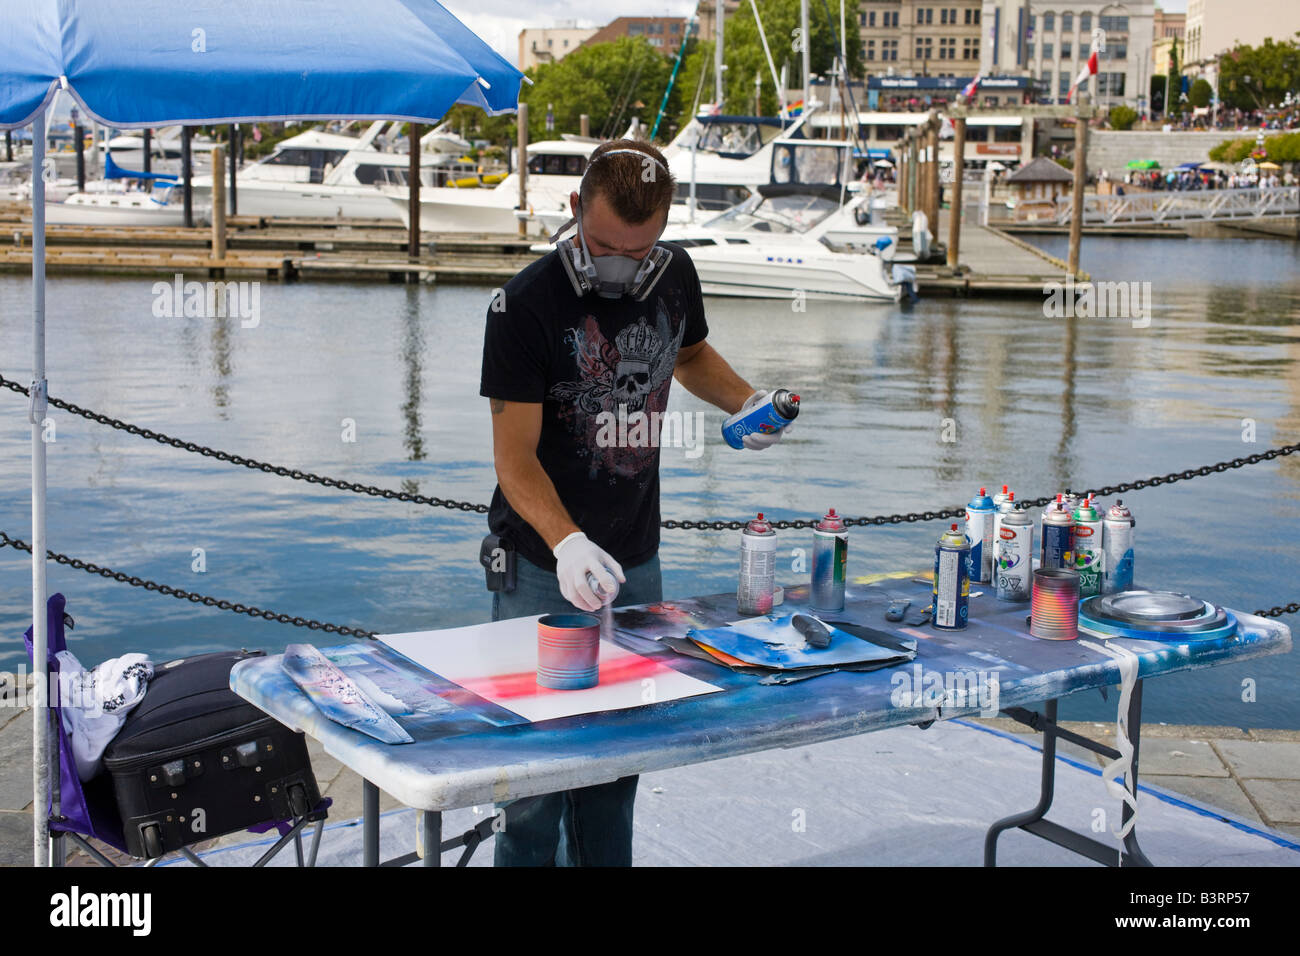 spray paint artist at work on harbourfront, Victoria, Vancouver Island, British Columbia, Canada Stock Photo